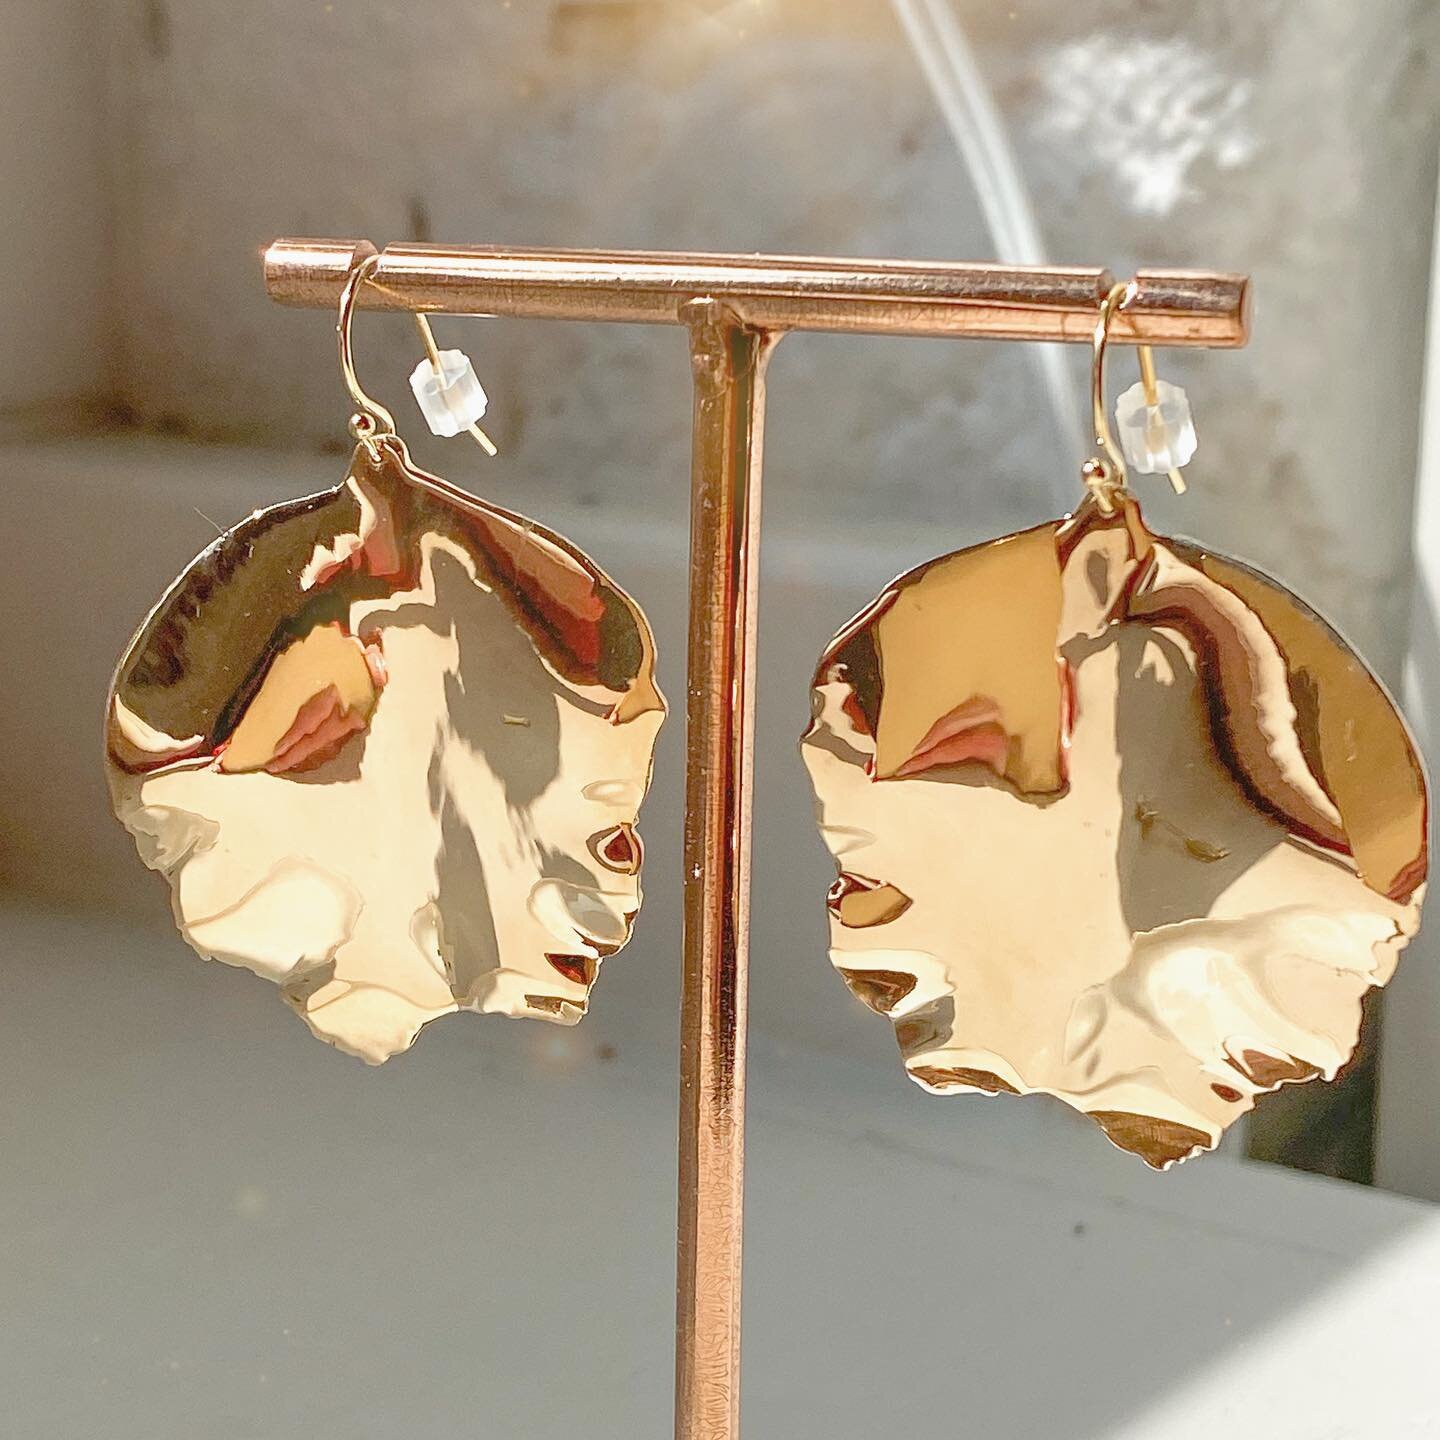 New to the shop!💕 Dress up any outfit with these uniquely designed leaf earrings casted in bronze with gold filled ear wire. 😍
.
.
#cokibijoux #handmadejewelry #kccrossroads #shoplocalkc #baueralleyshops #bronzeearrings #locallydesigned